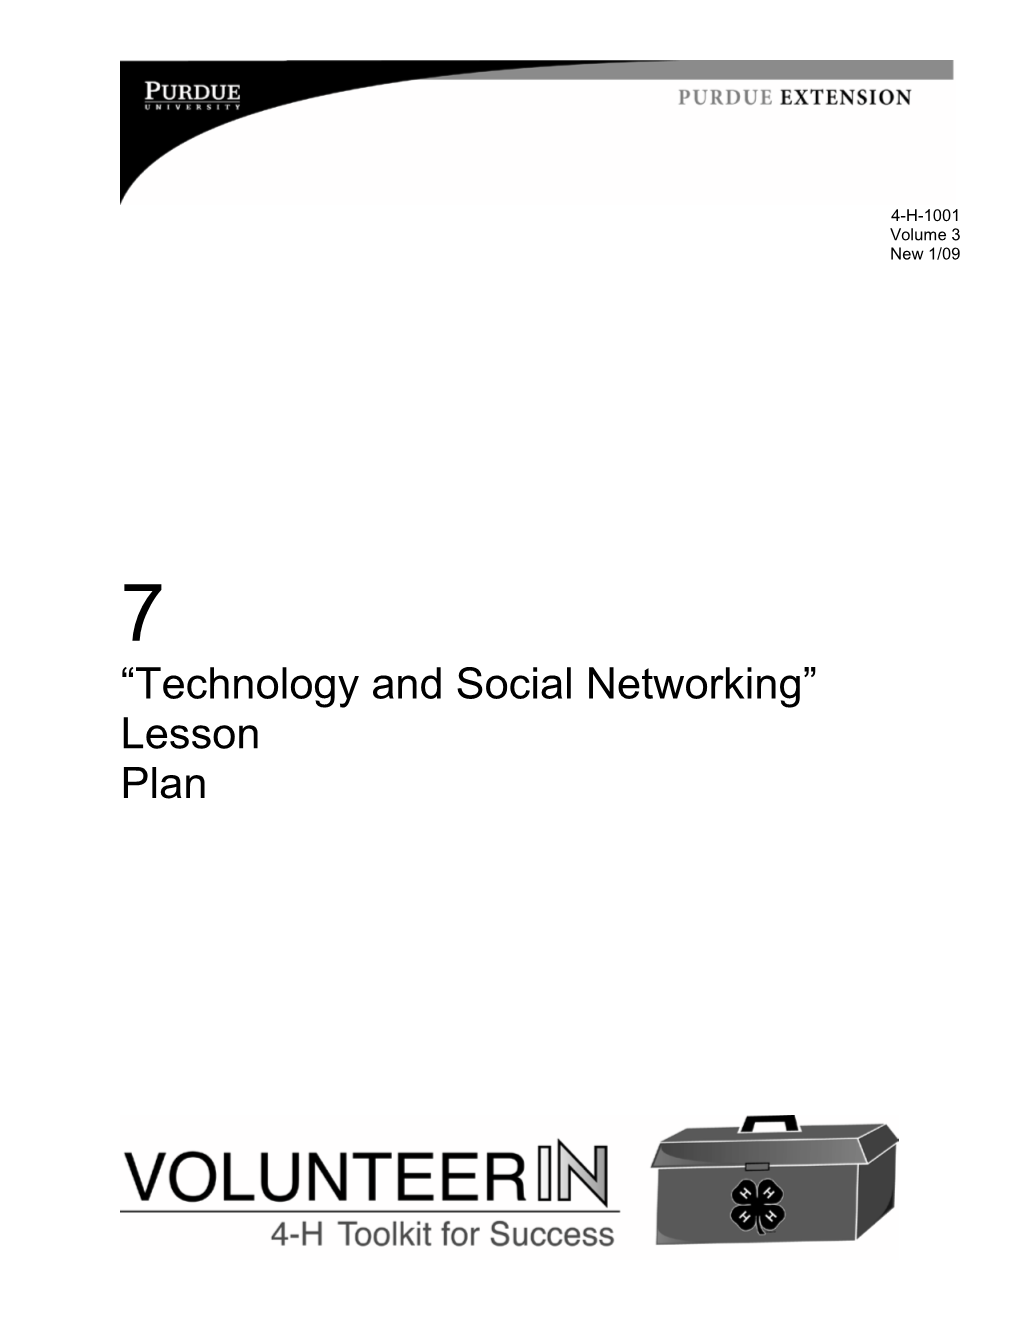 “Technology and Social Networking” Lesson Plan